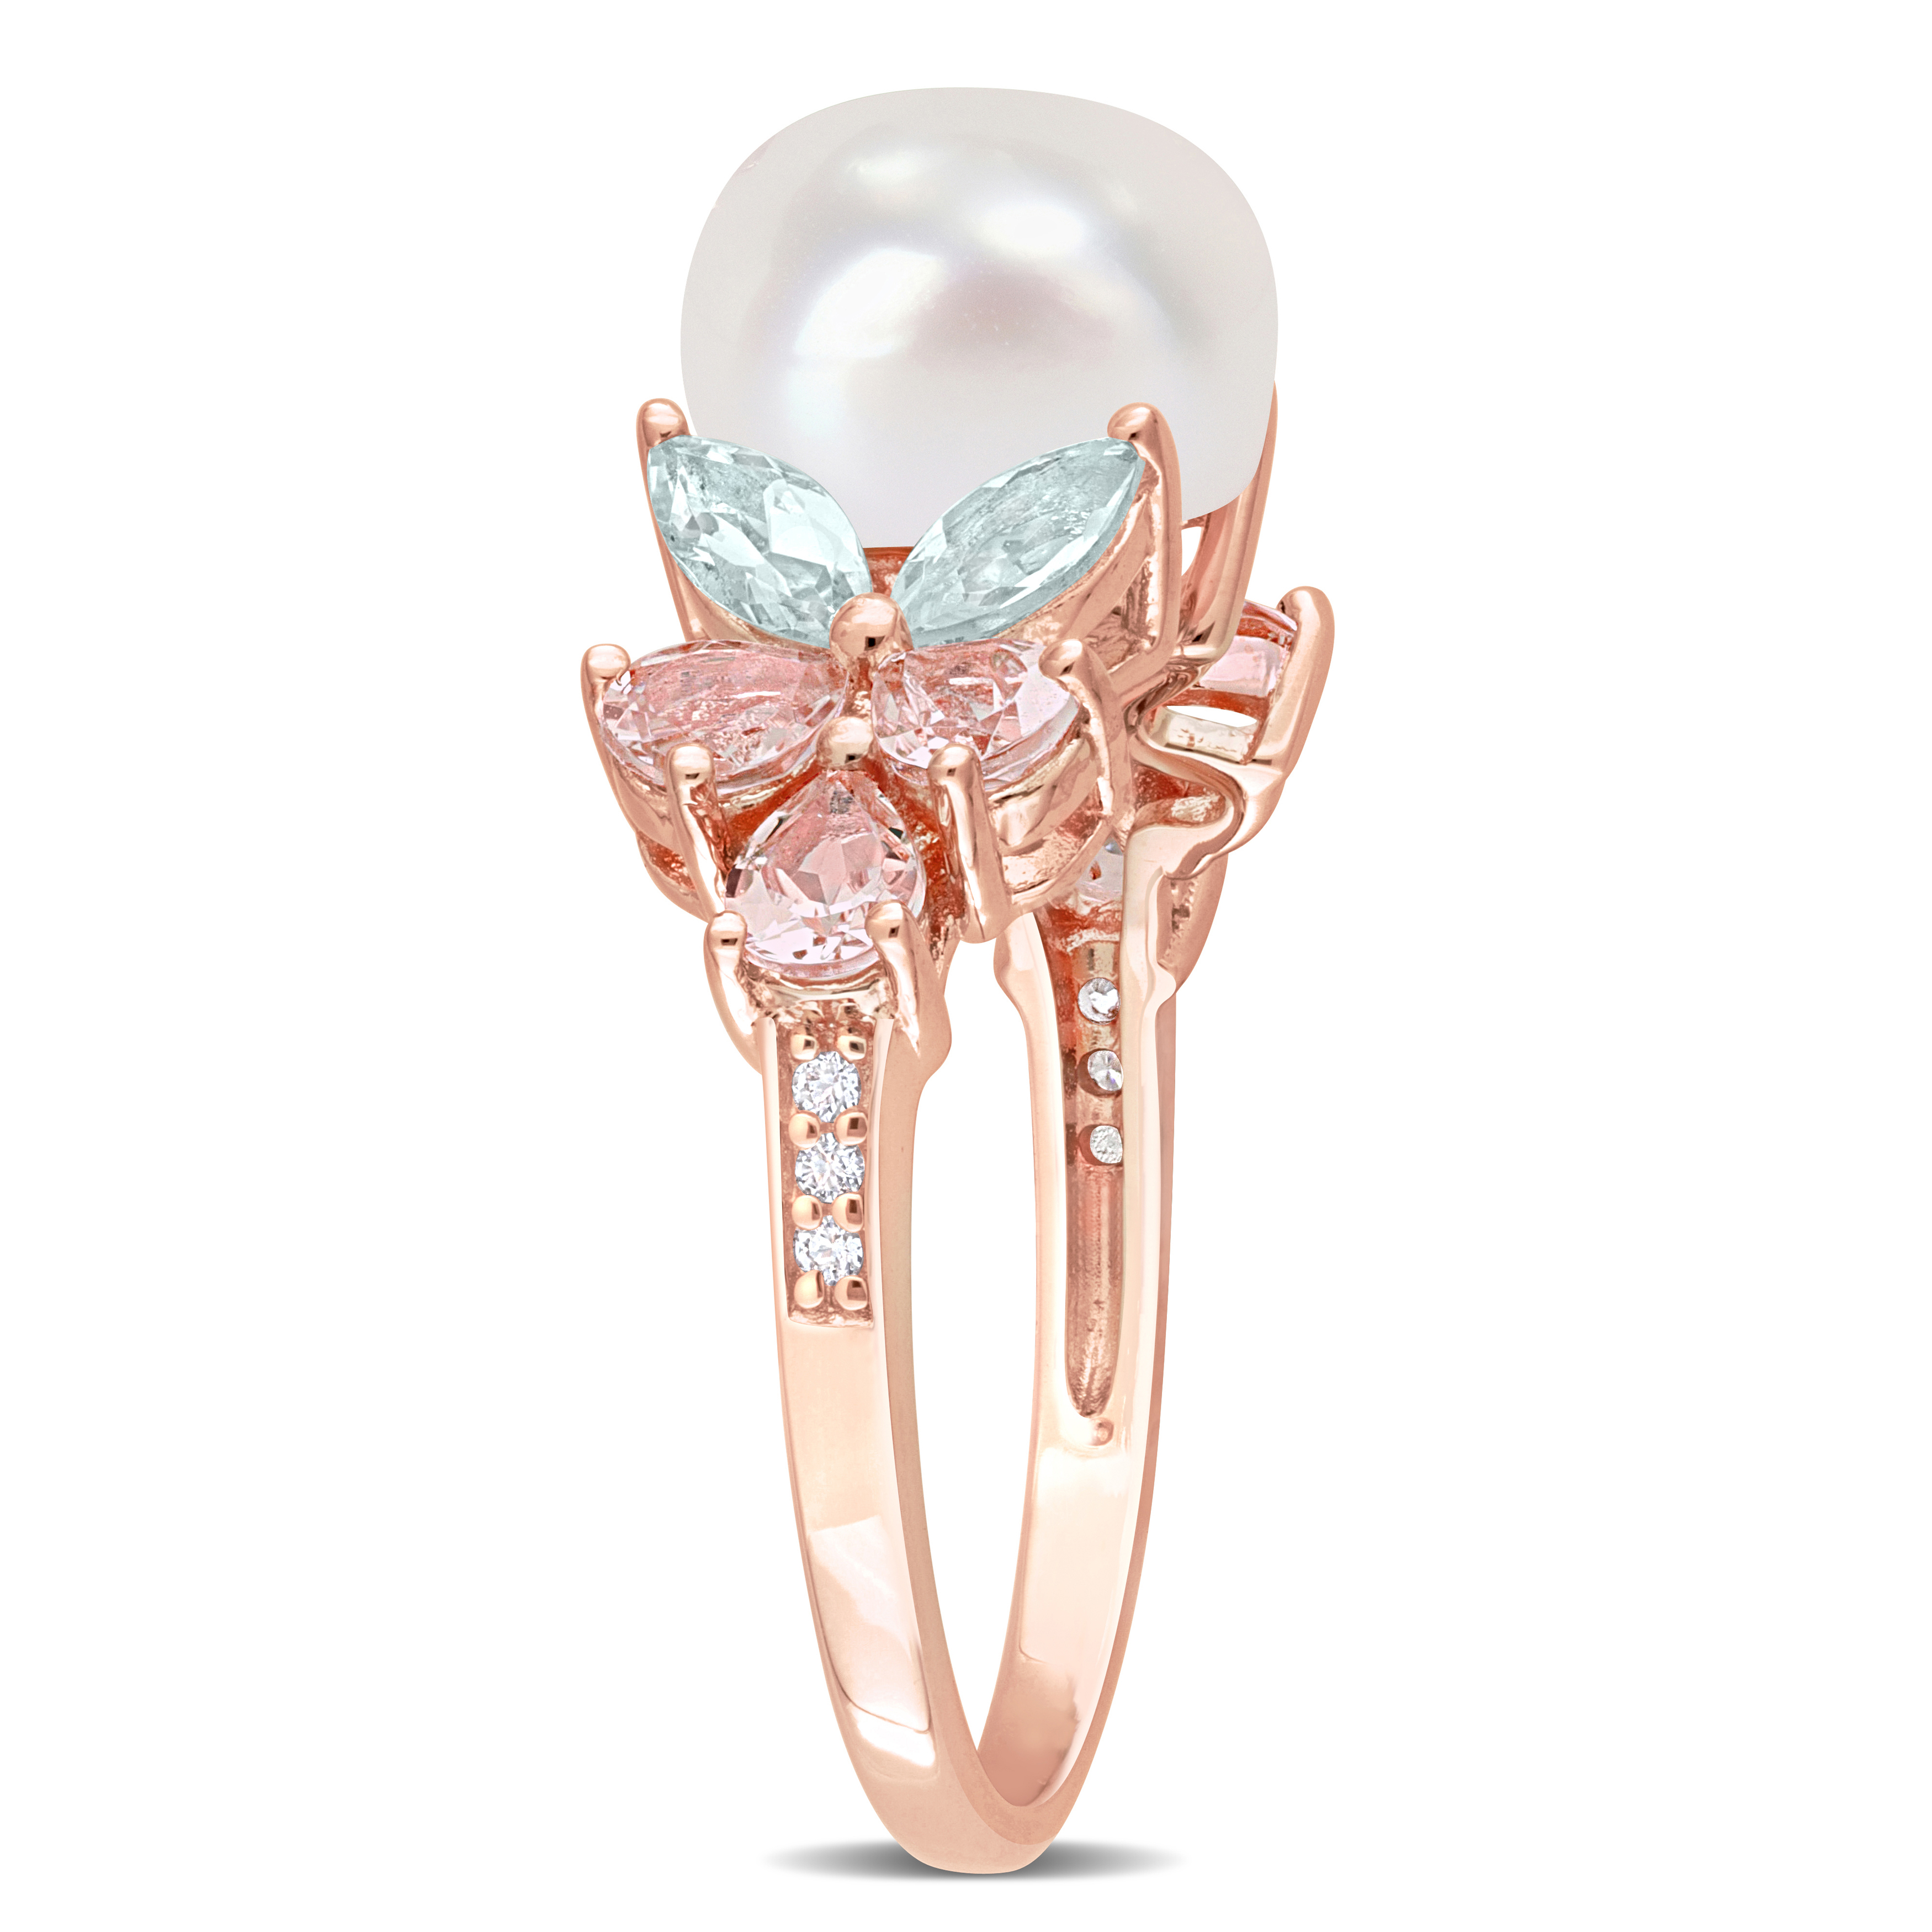 8.5-9MM Cultured Freshwater Pearl and 1 2/5 CT TGW Morganite Aquamarine White Topaz Cocktail Ring in 18k Rose Gold Plated Sterling Silver